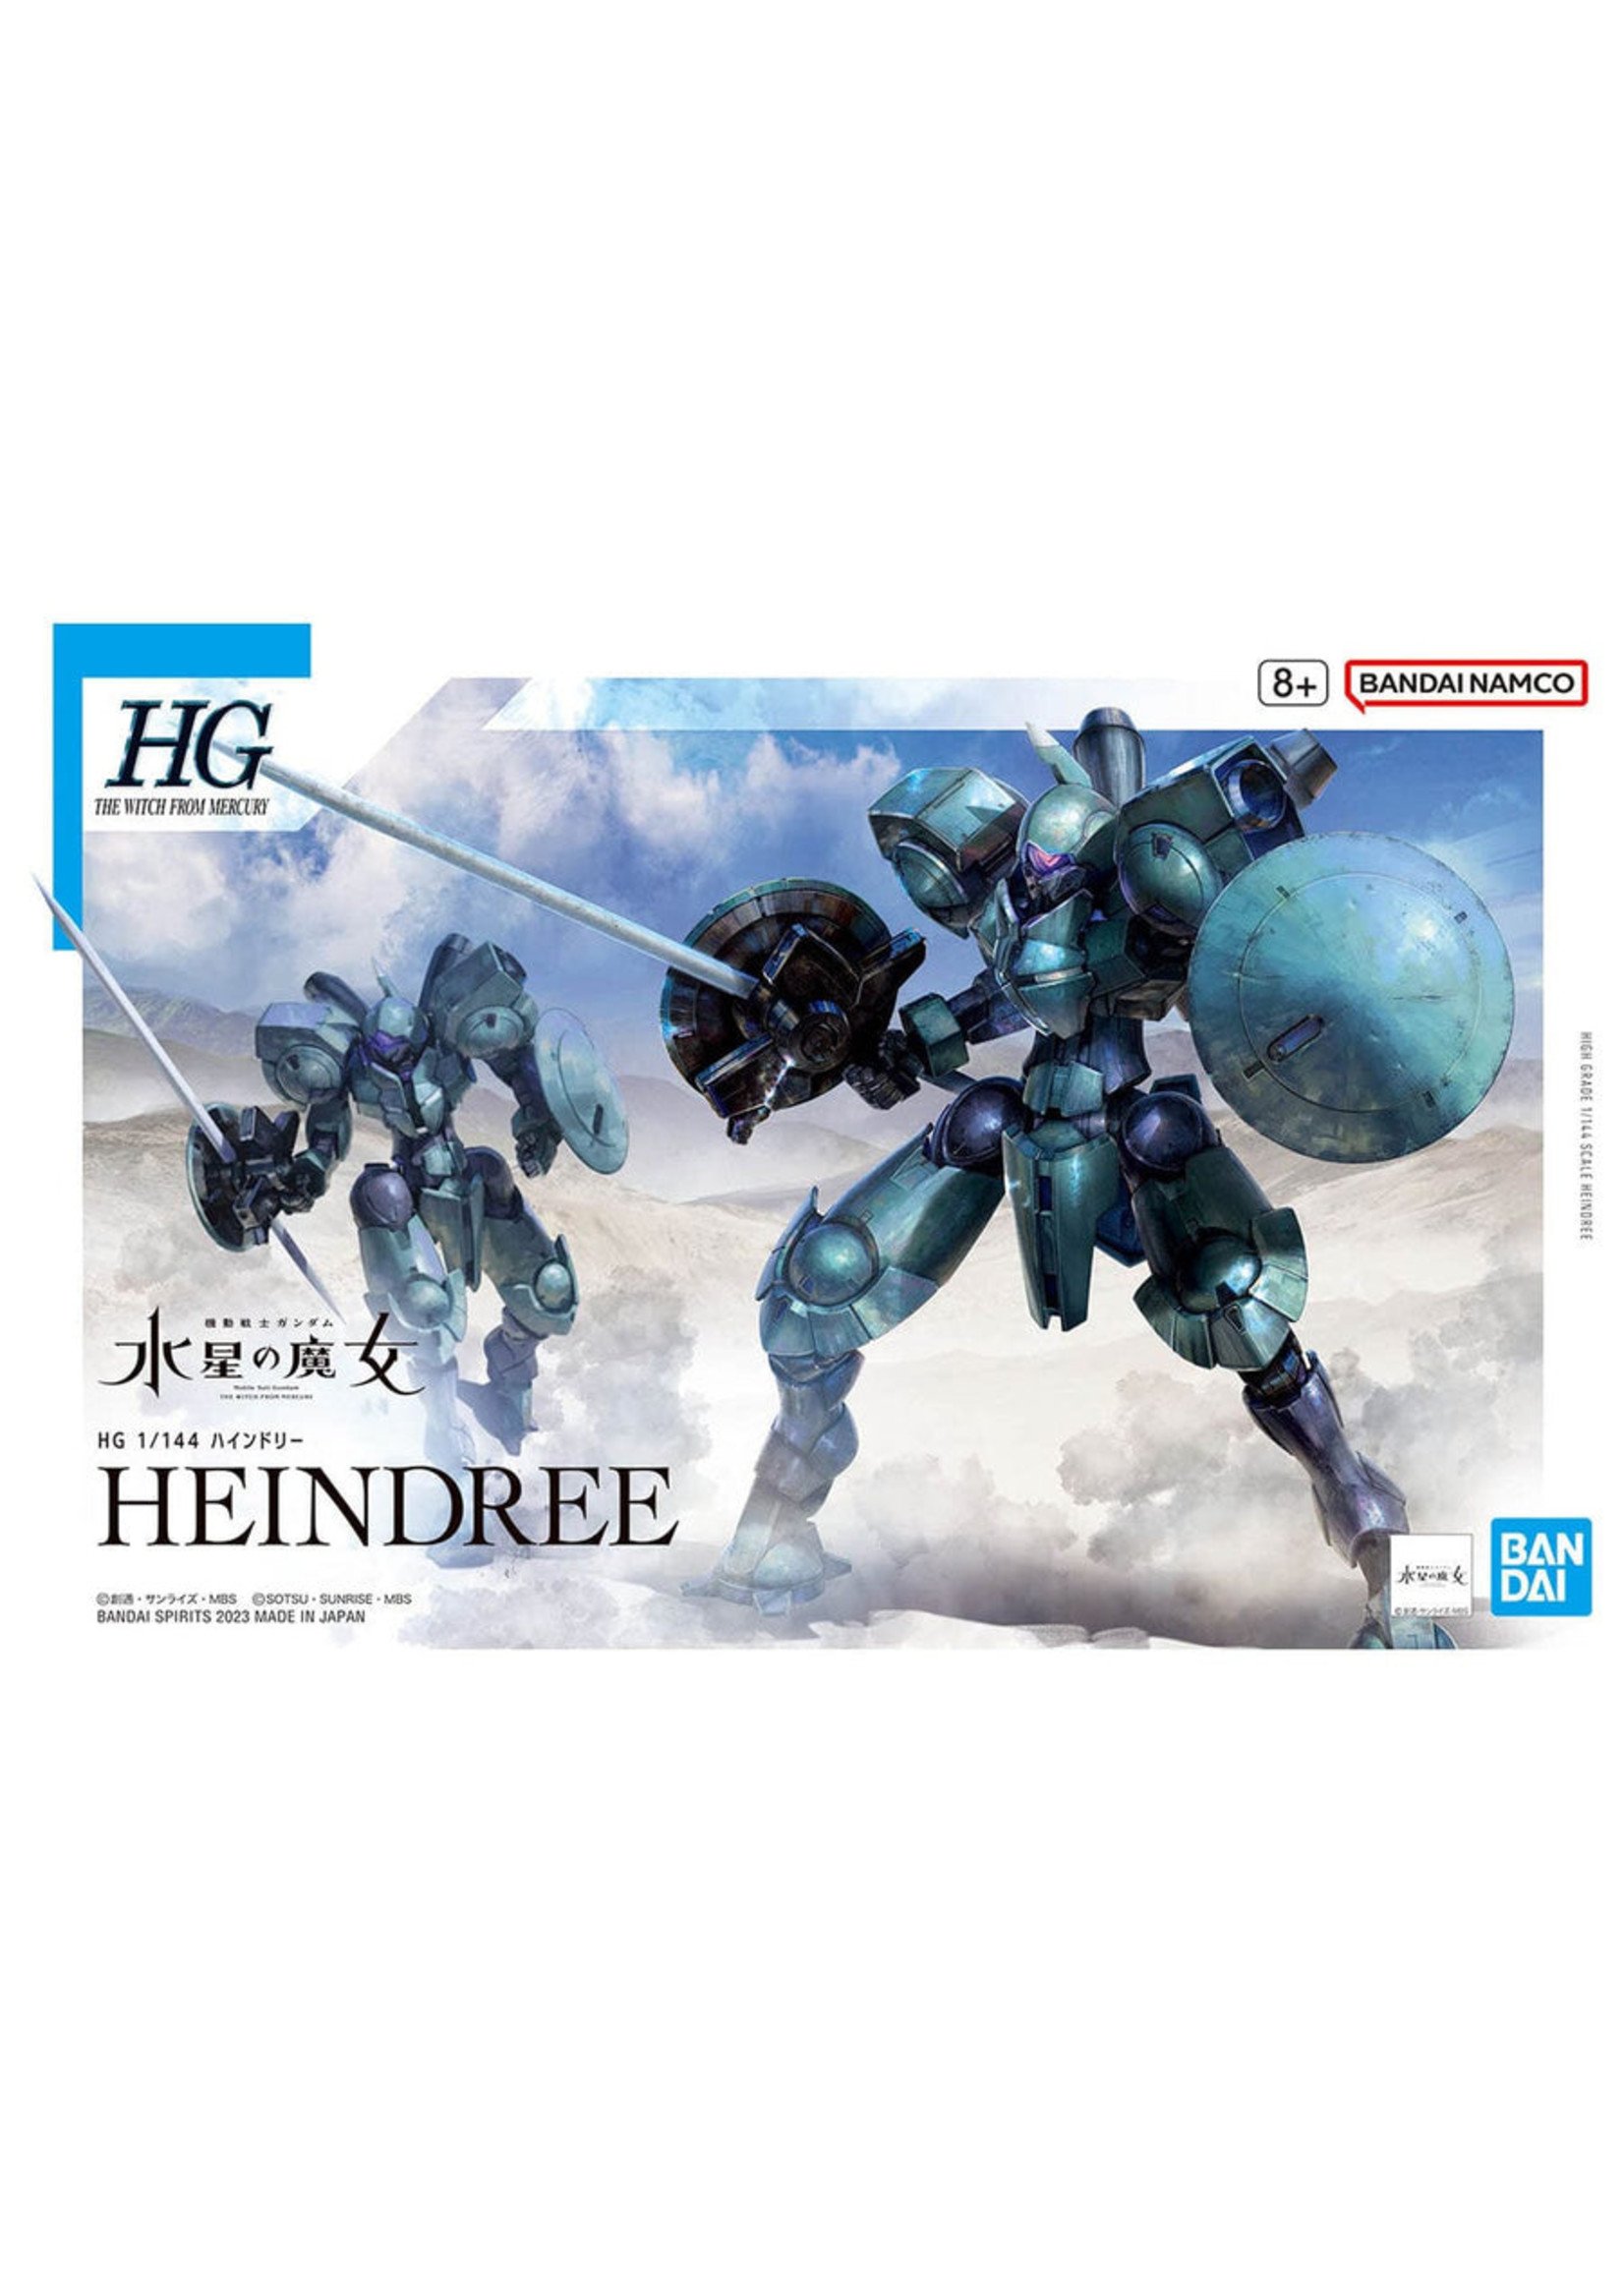 Bandai #16 "The Witch From Mercury" Heindree